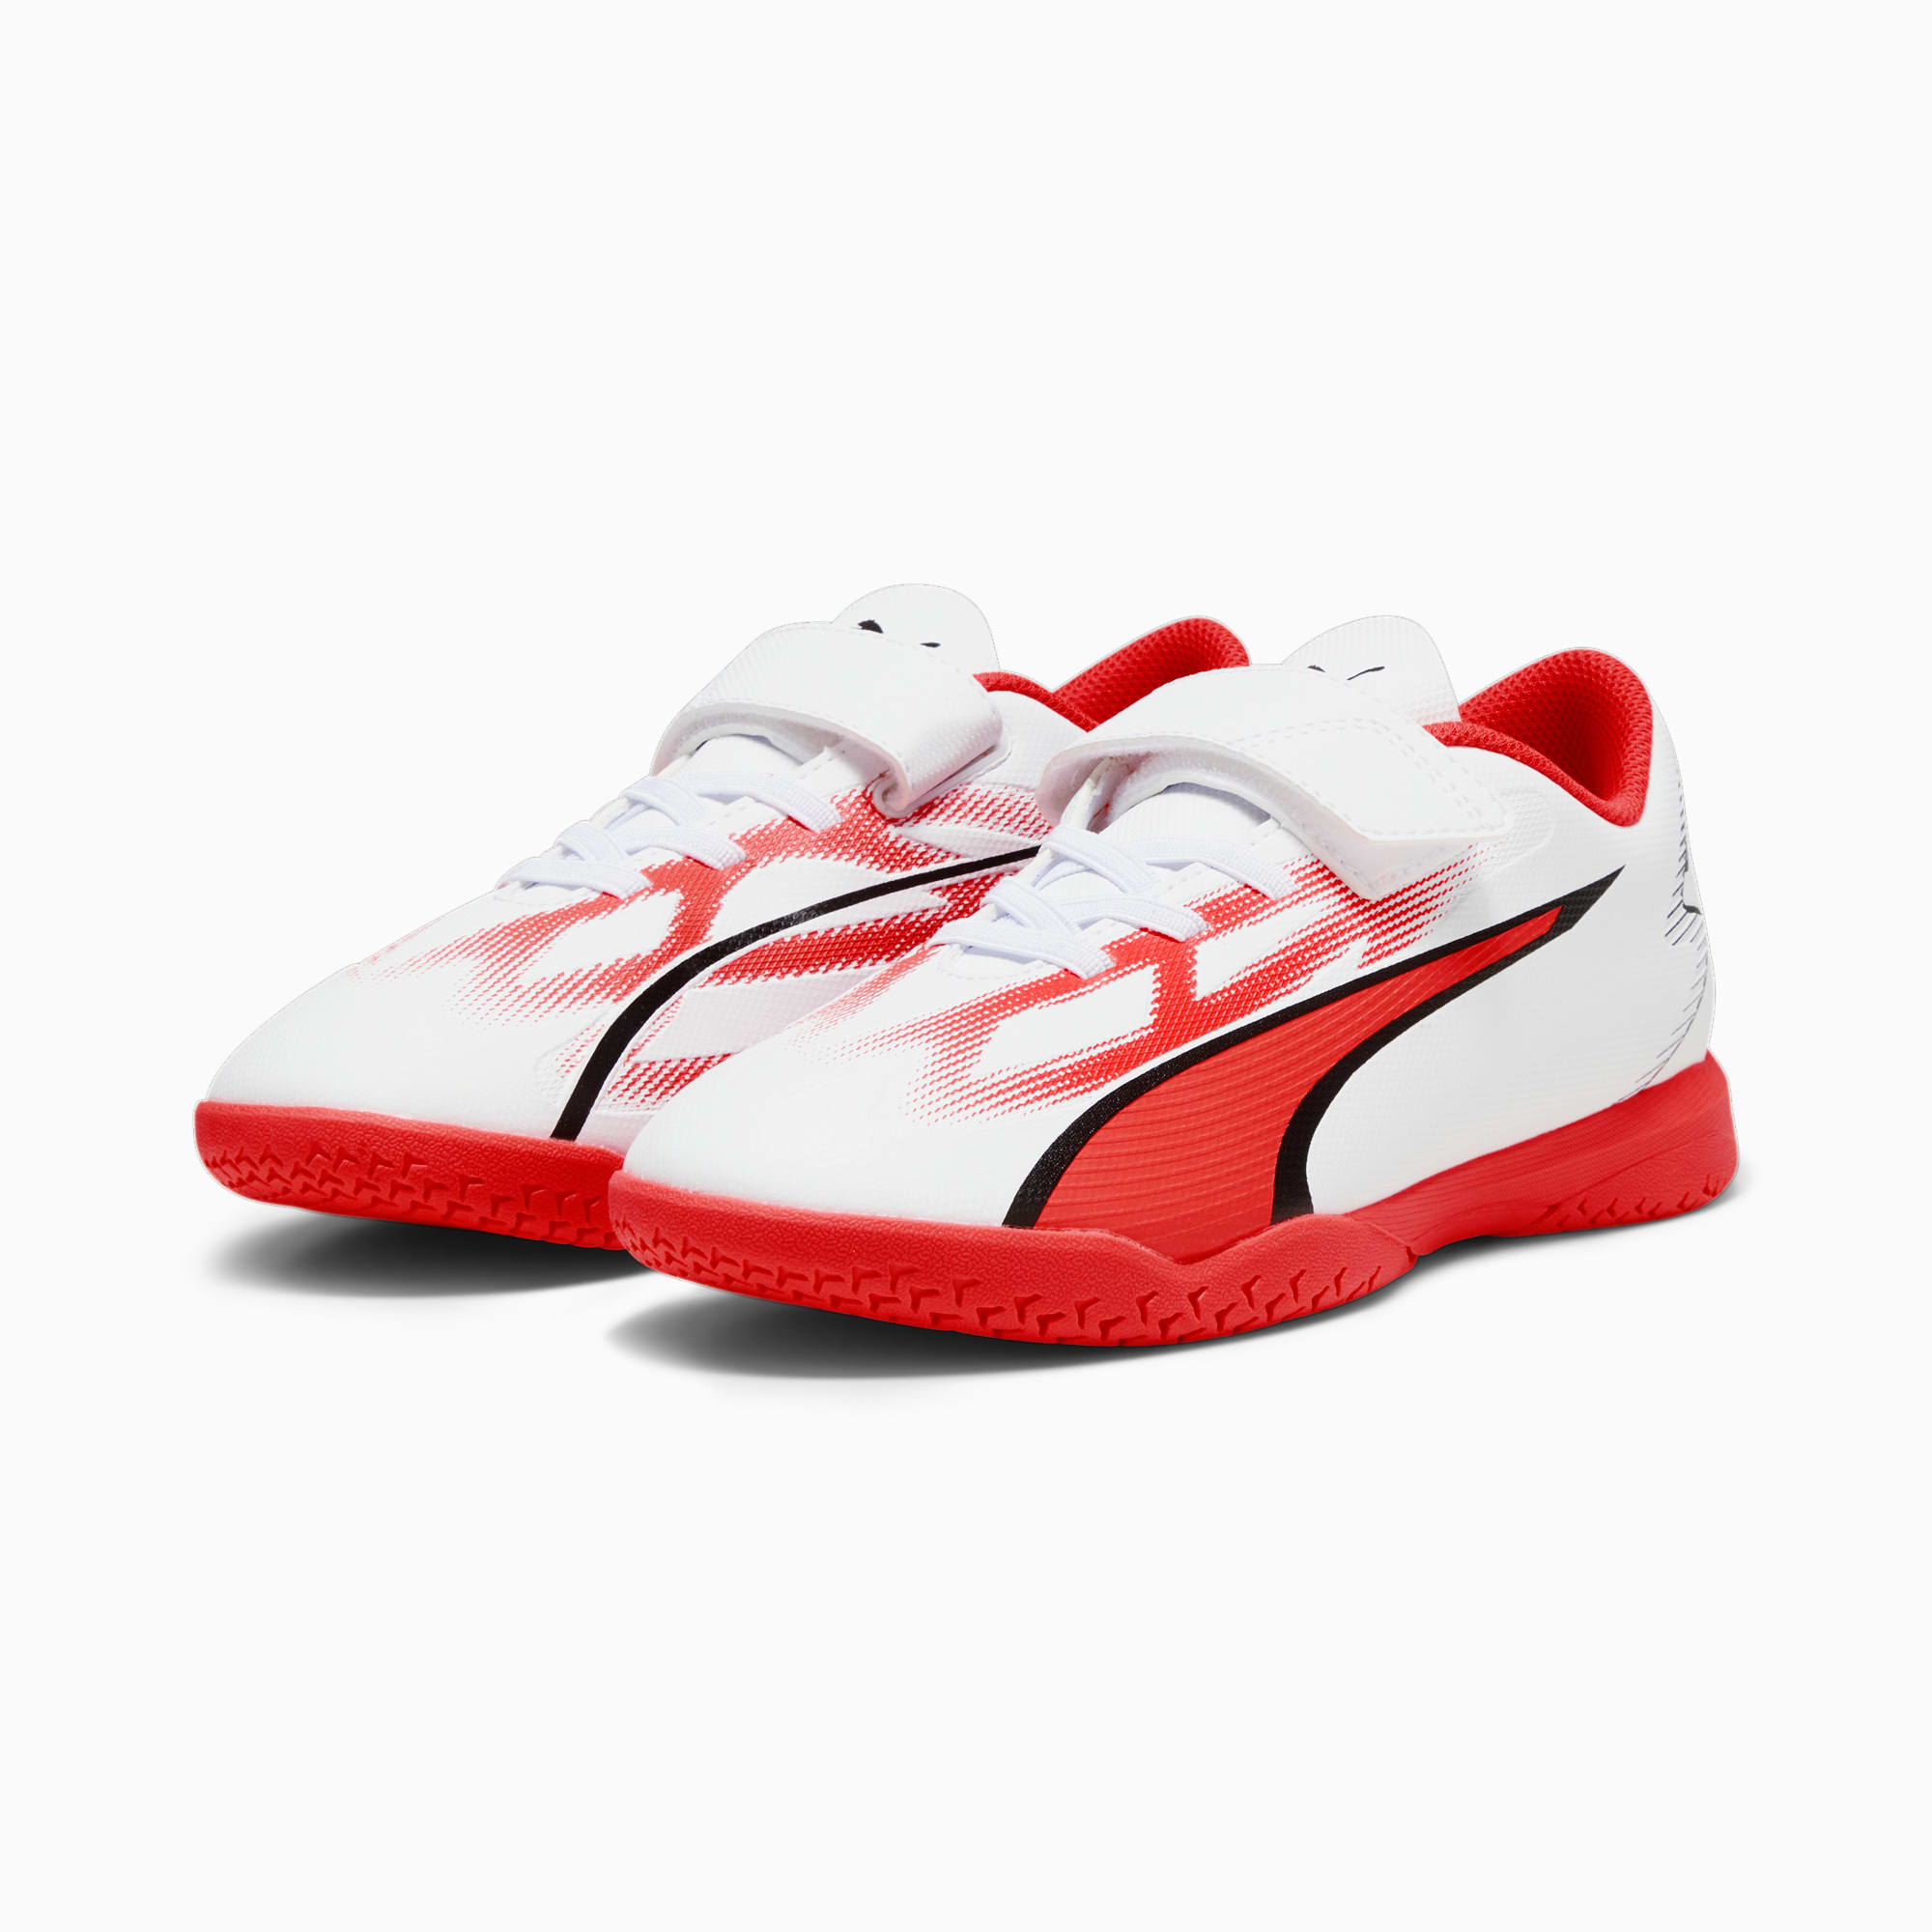 PUMA Ultra Play IT Youth Football Boots, White/Black/Fire Orchid